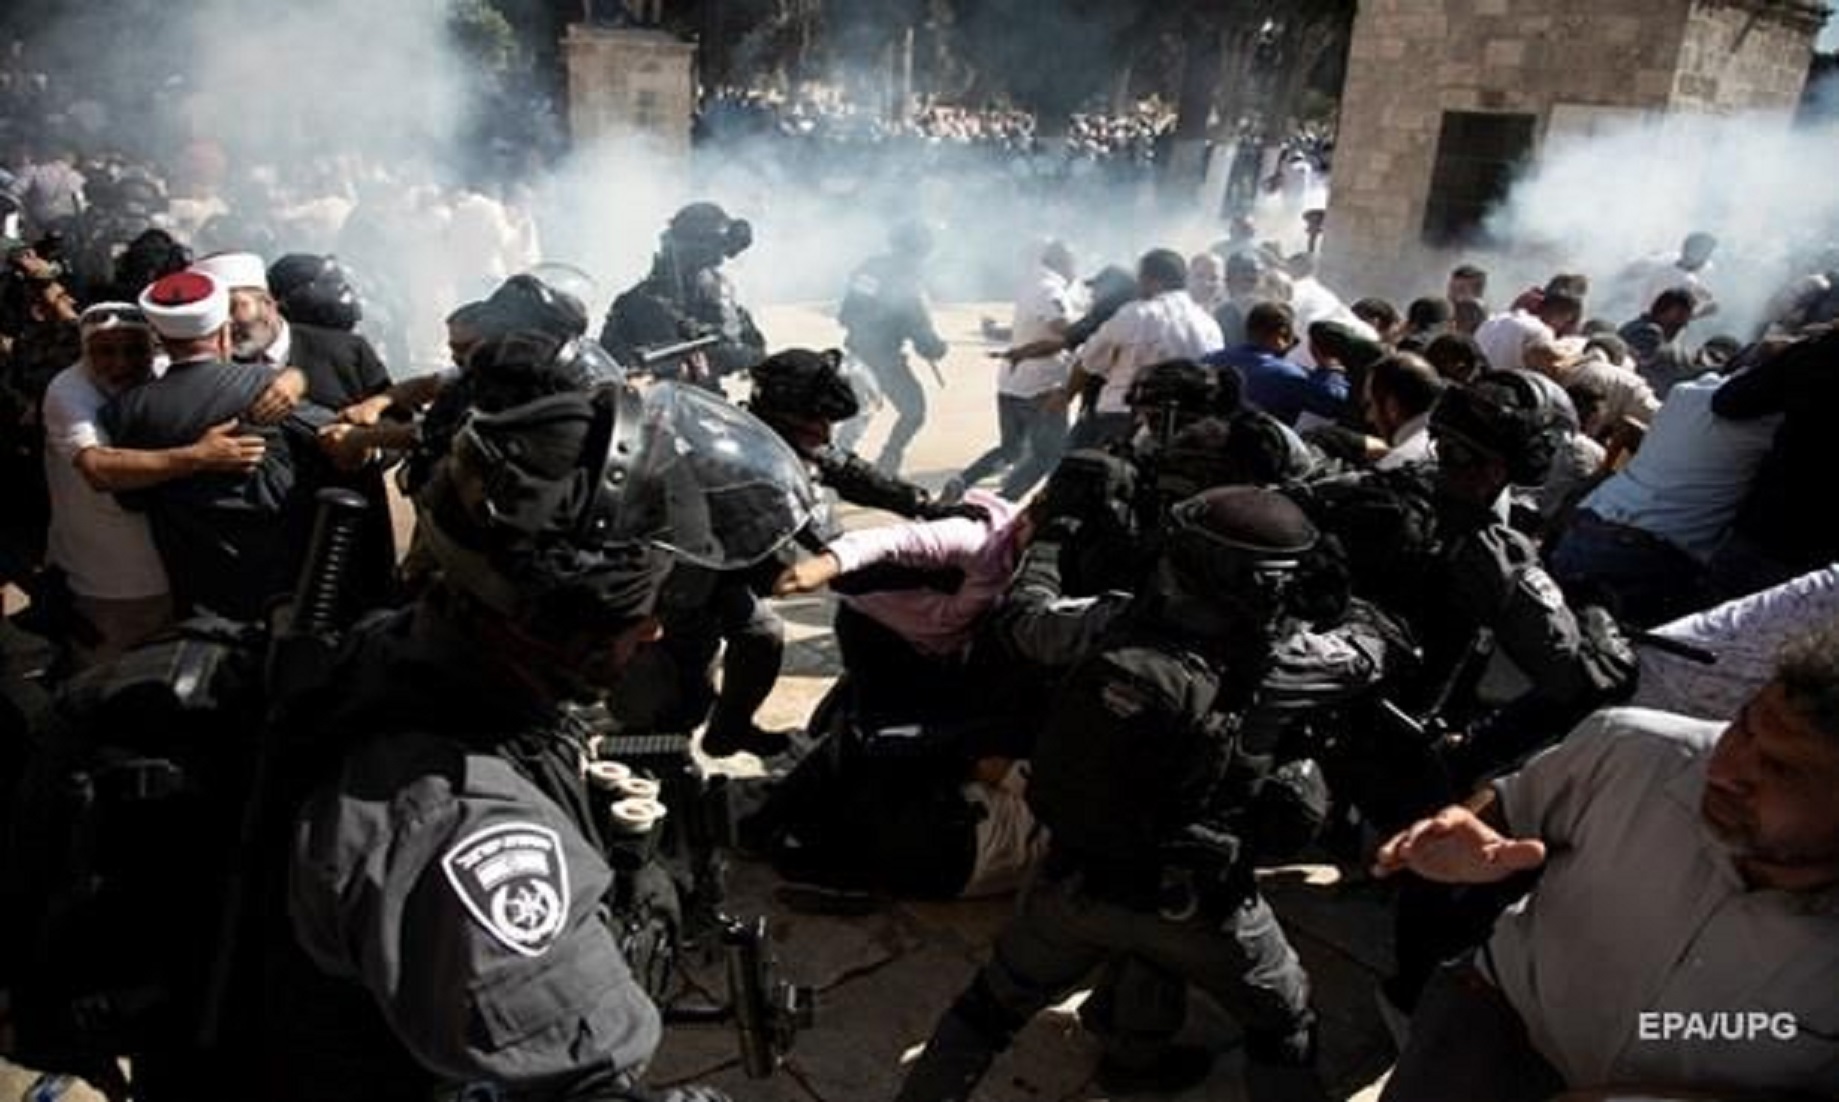 Hundreds Of Palestinians Injured In Clashes With Israeli Police